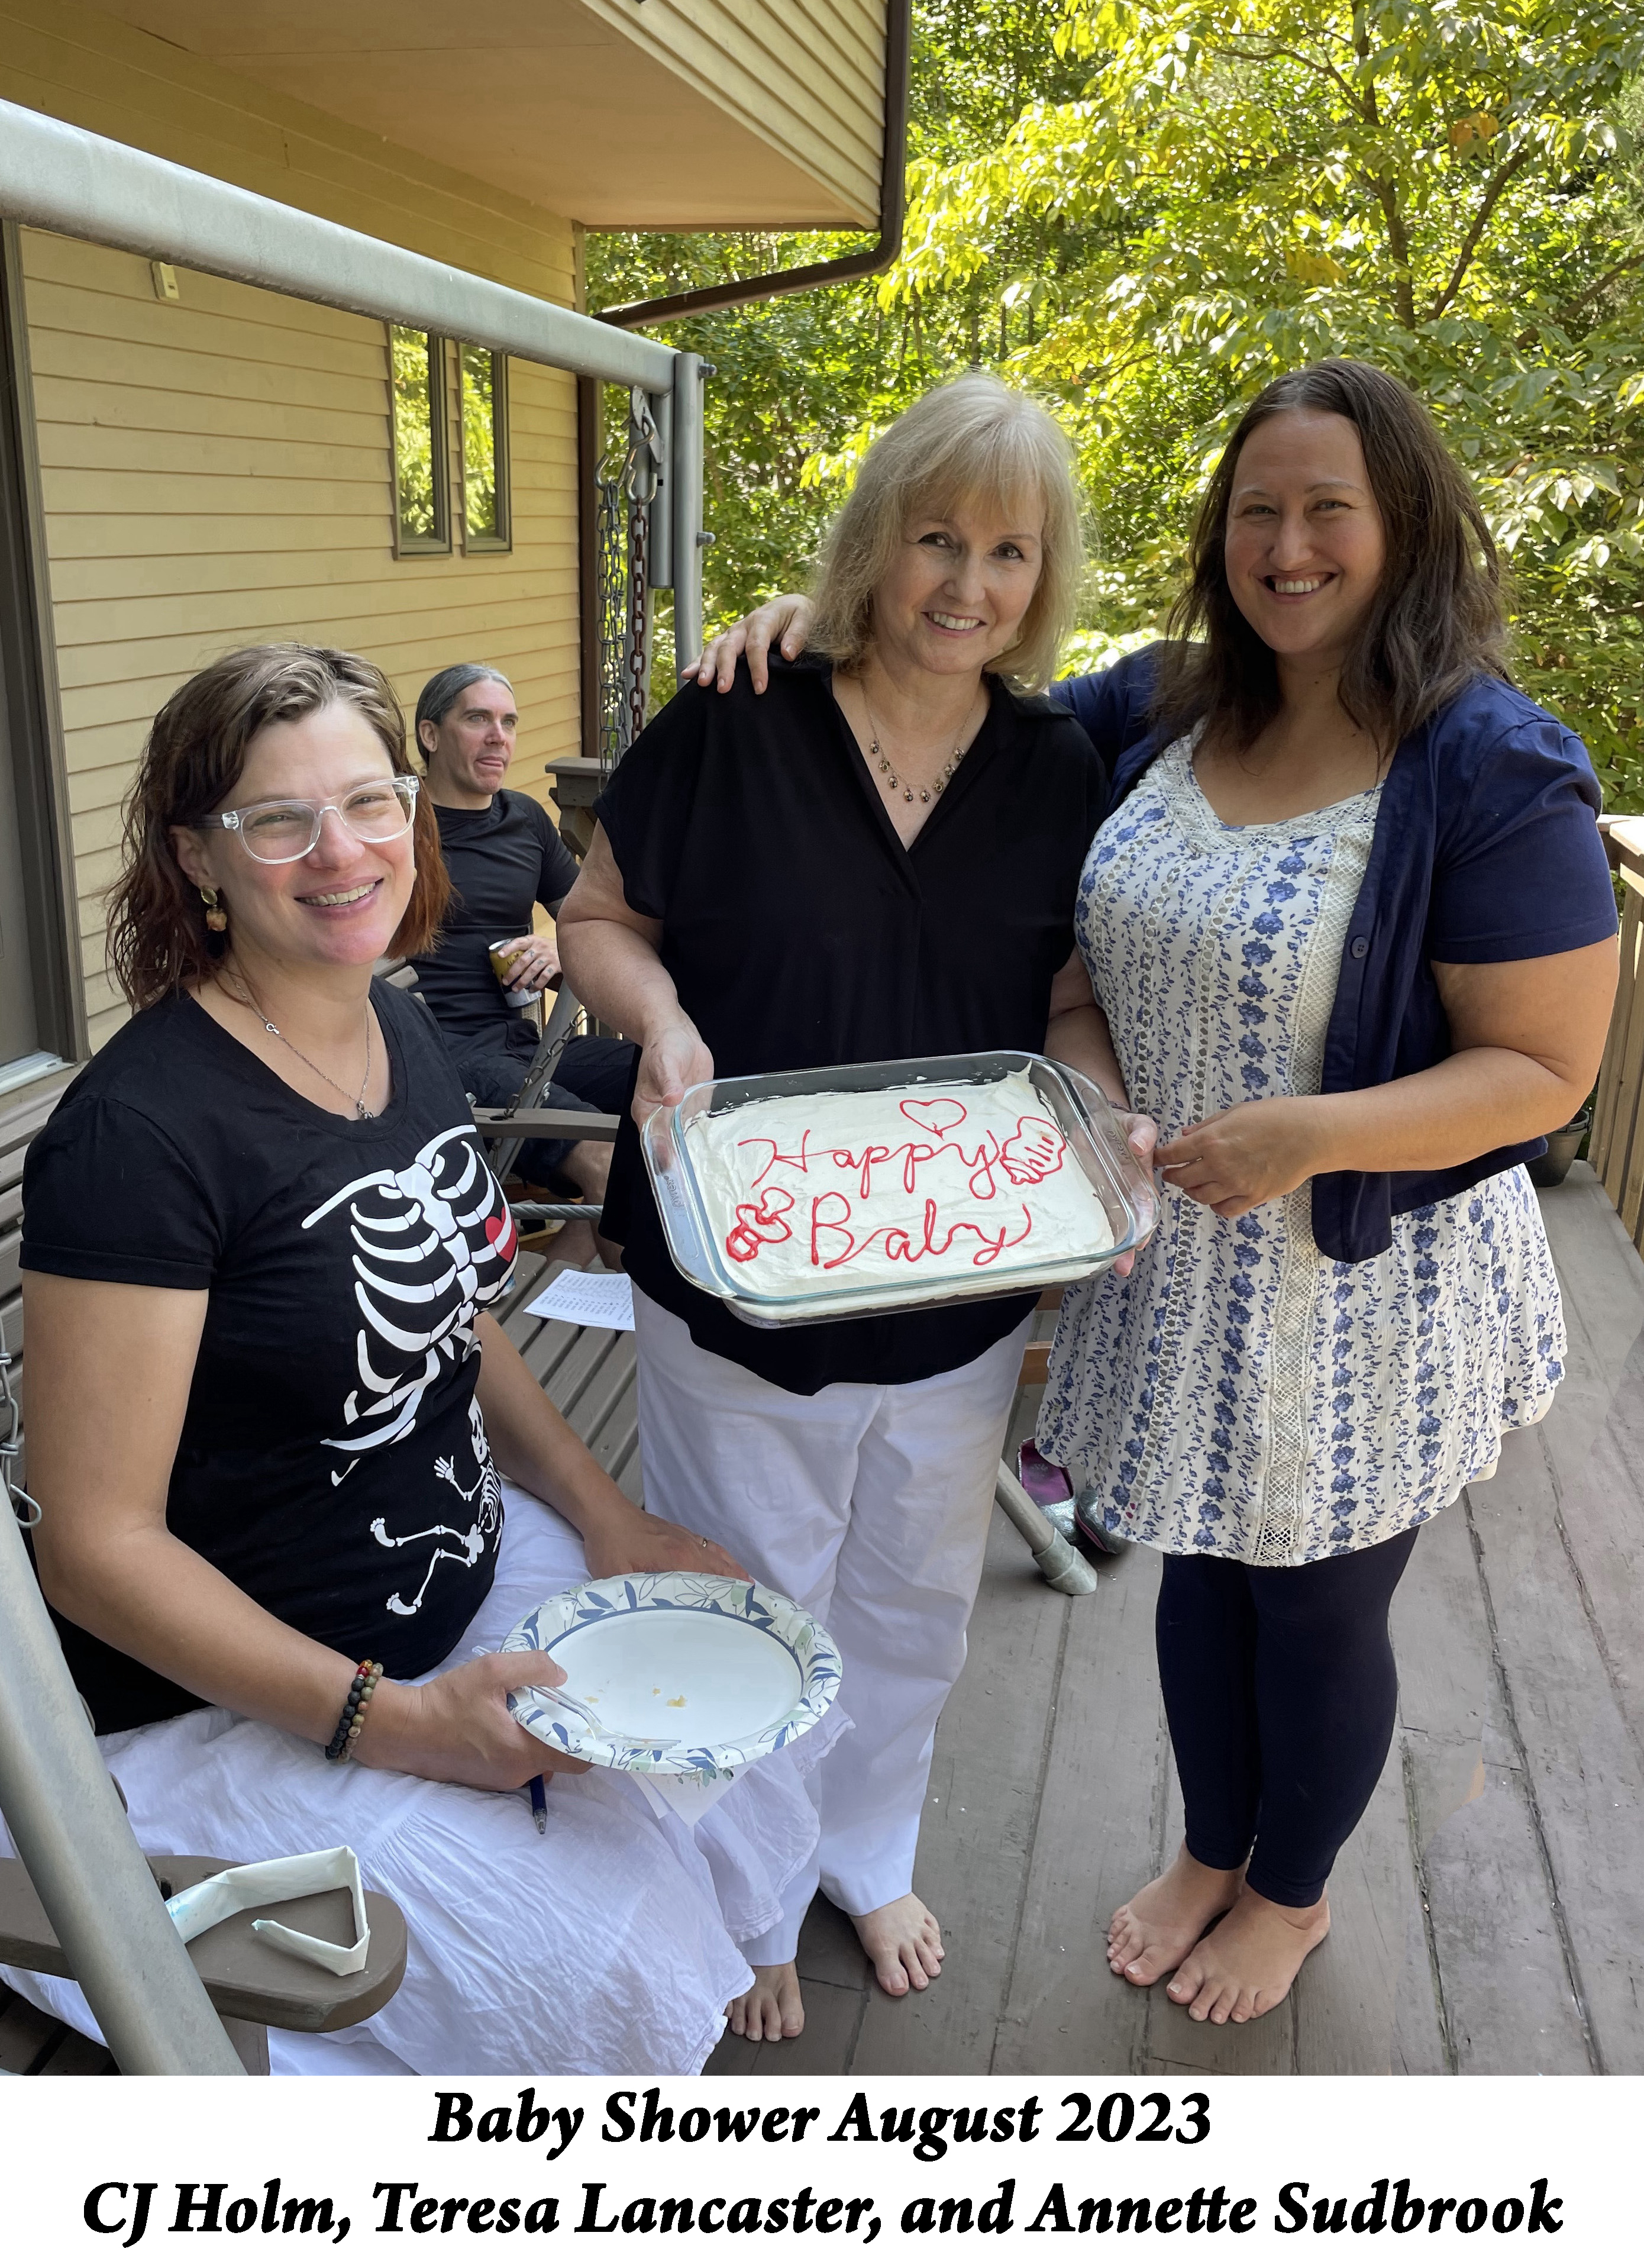 CJ, Teresa, and Annette are posing with the cake that Teresa made